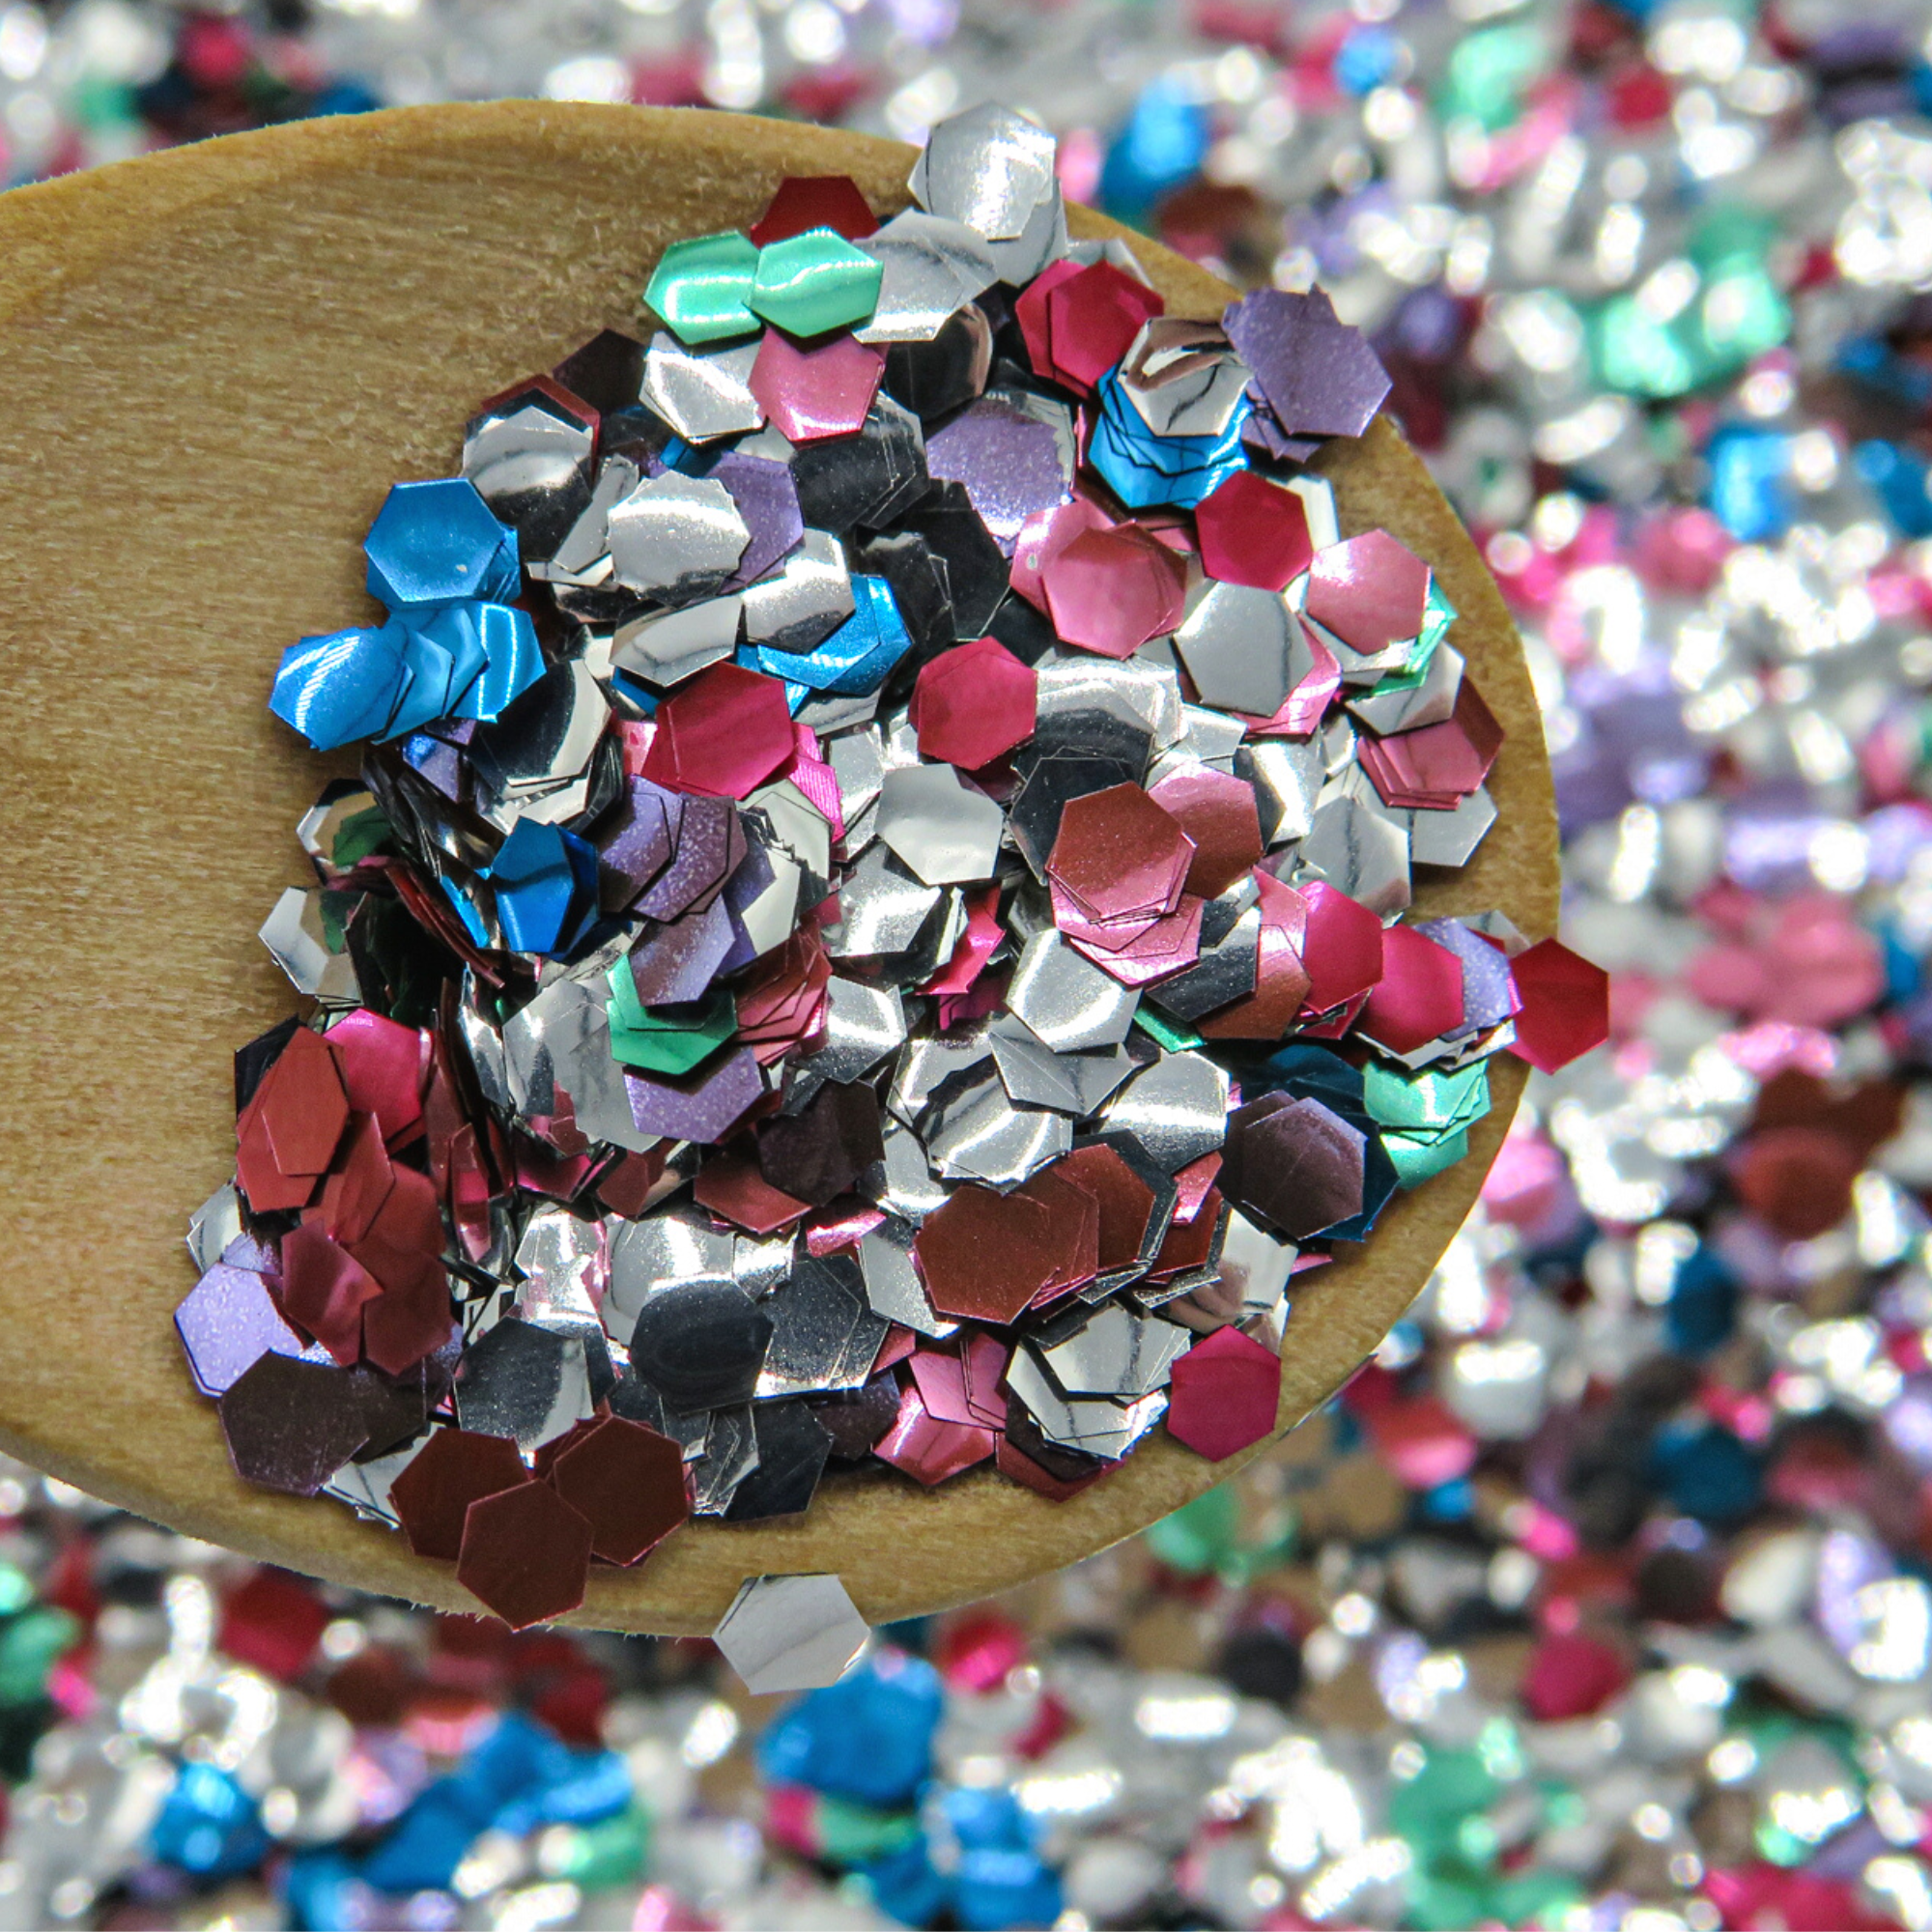 An ultra chunky mix of eco friendly glitter in pink, red, blue, green and silver shades